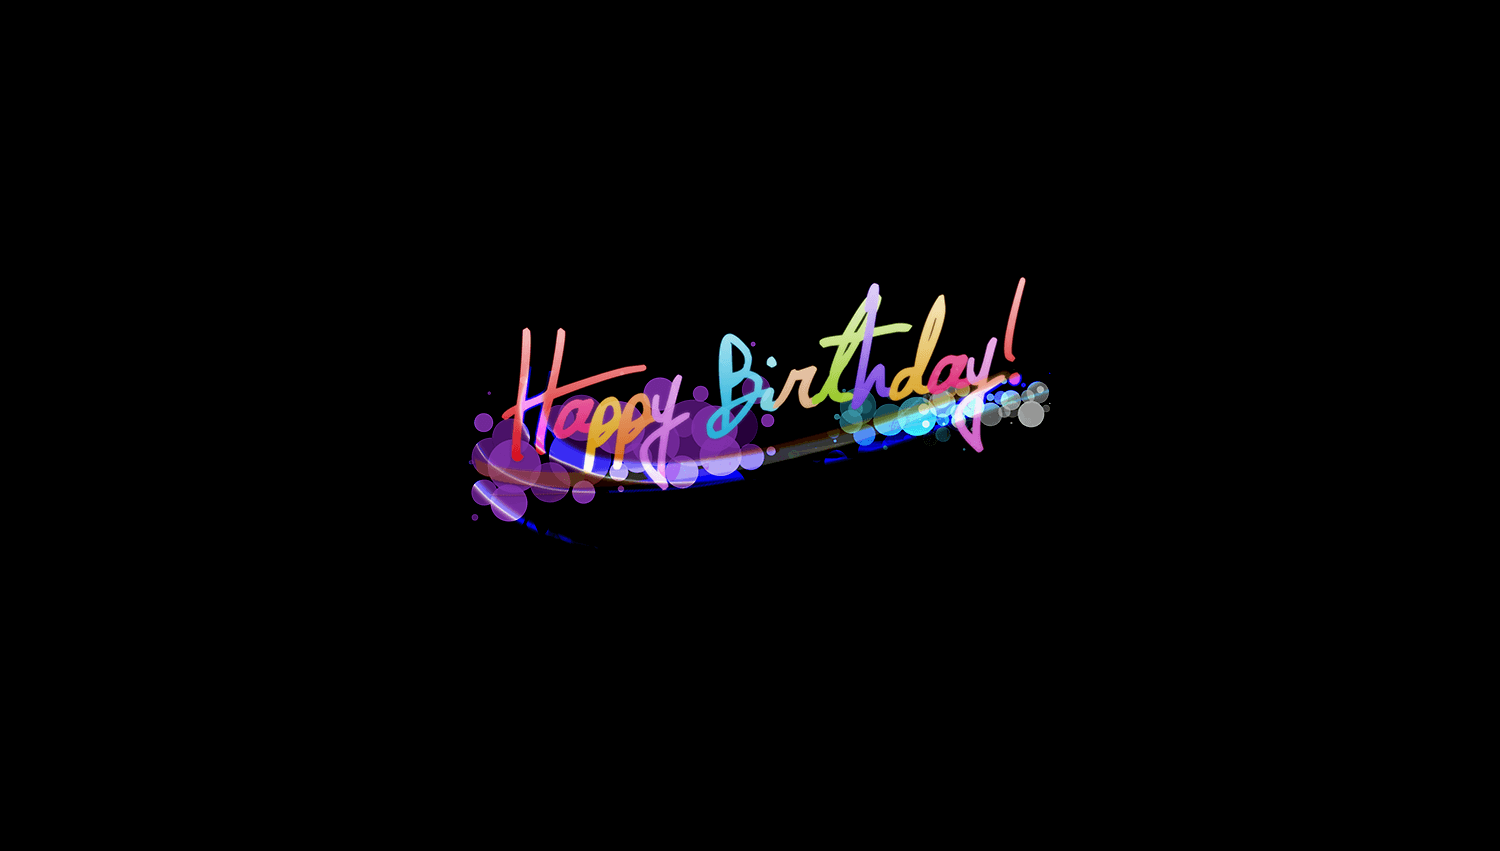 Happy Bday Free Wallpapers